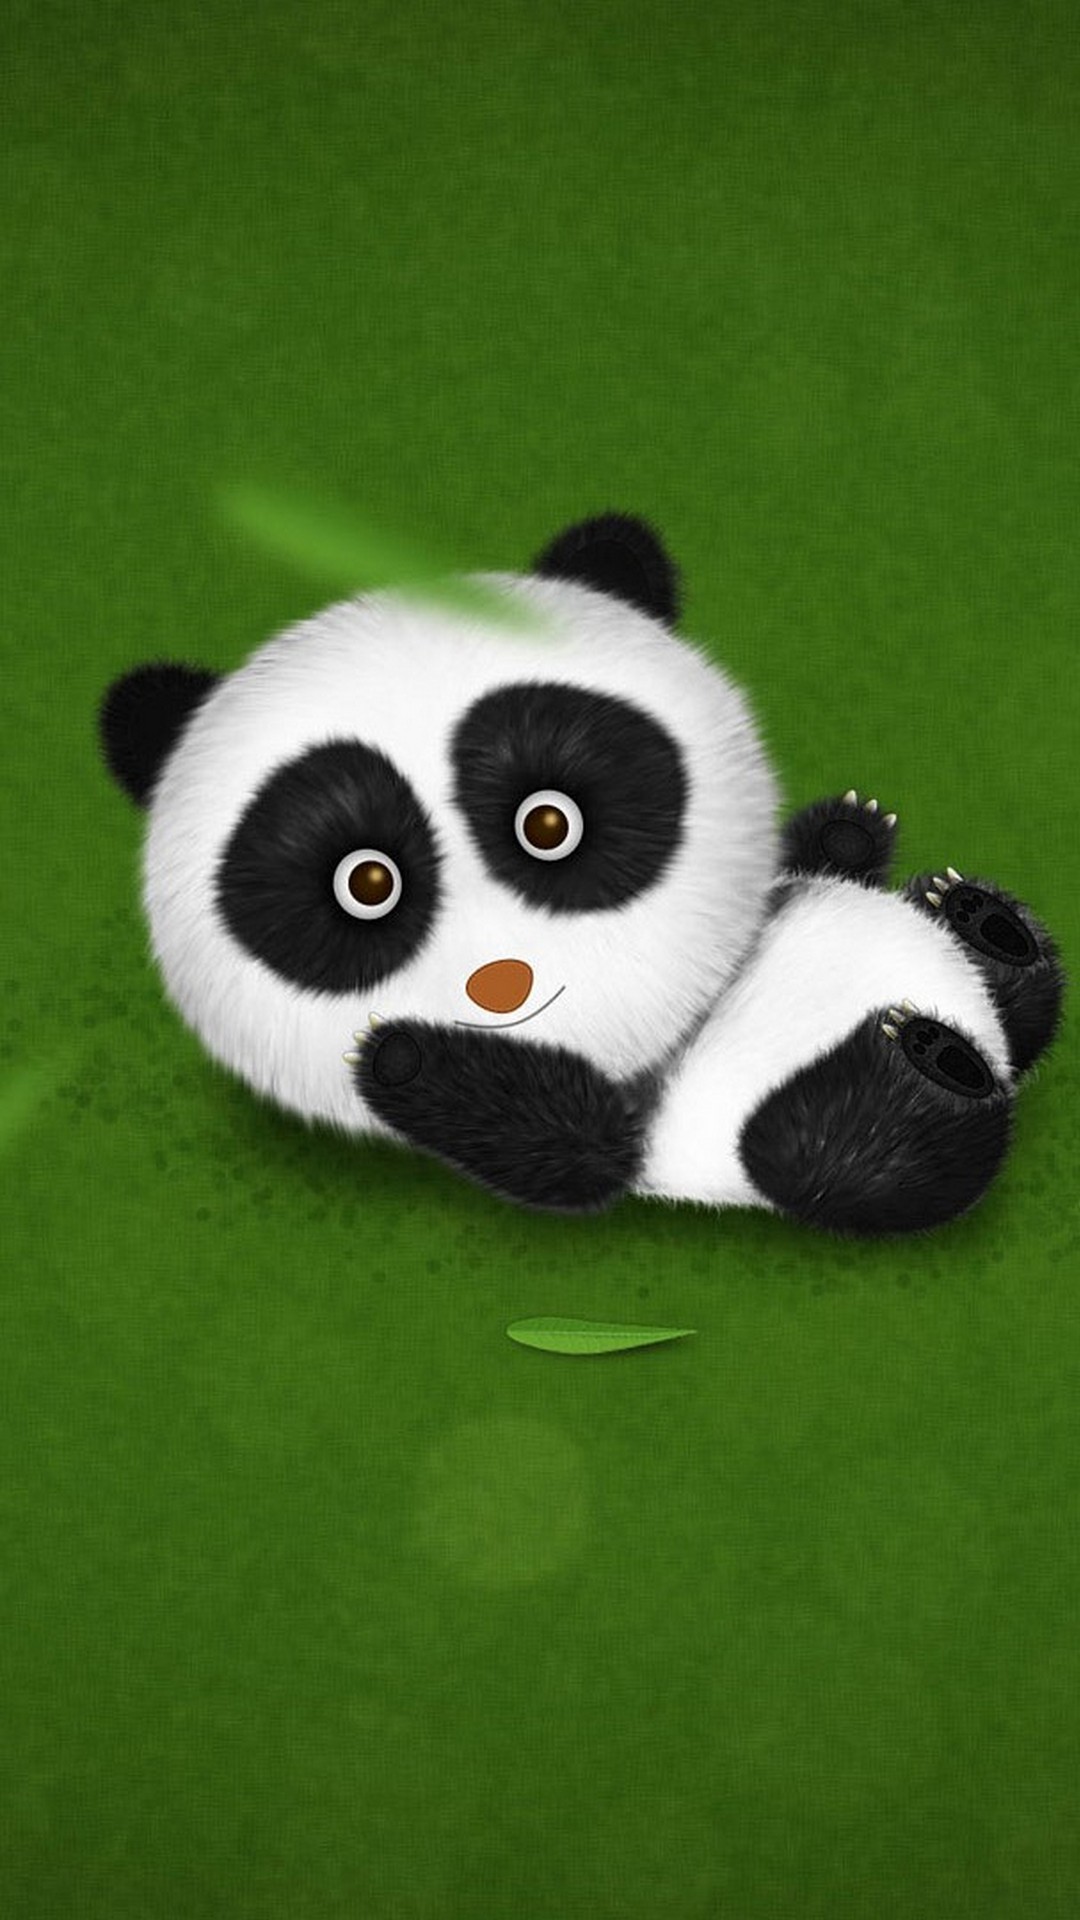 Wallpaper Cute Panda Android with HD resolution 1080x1920